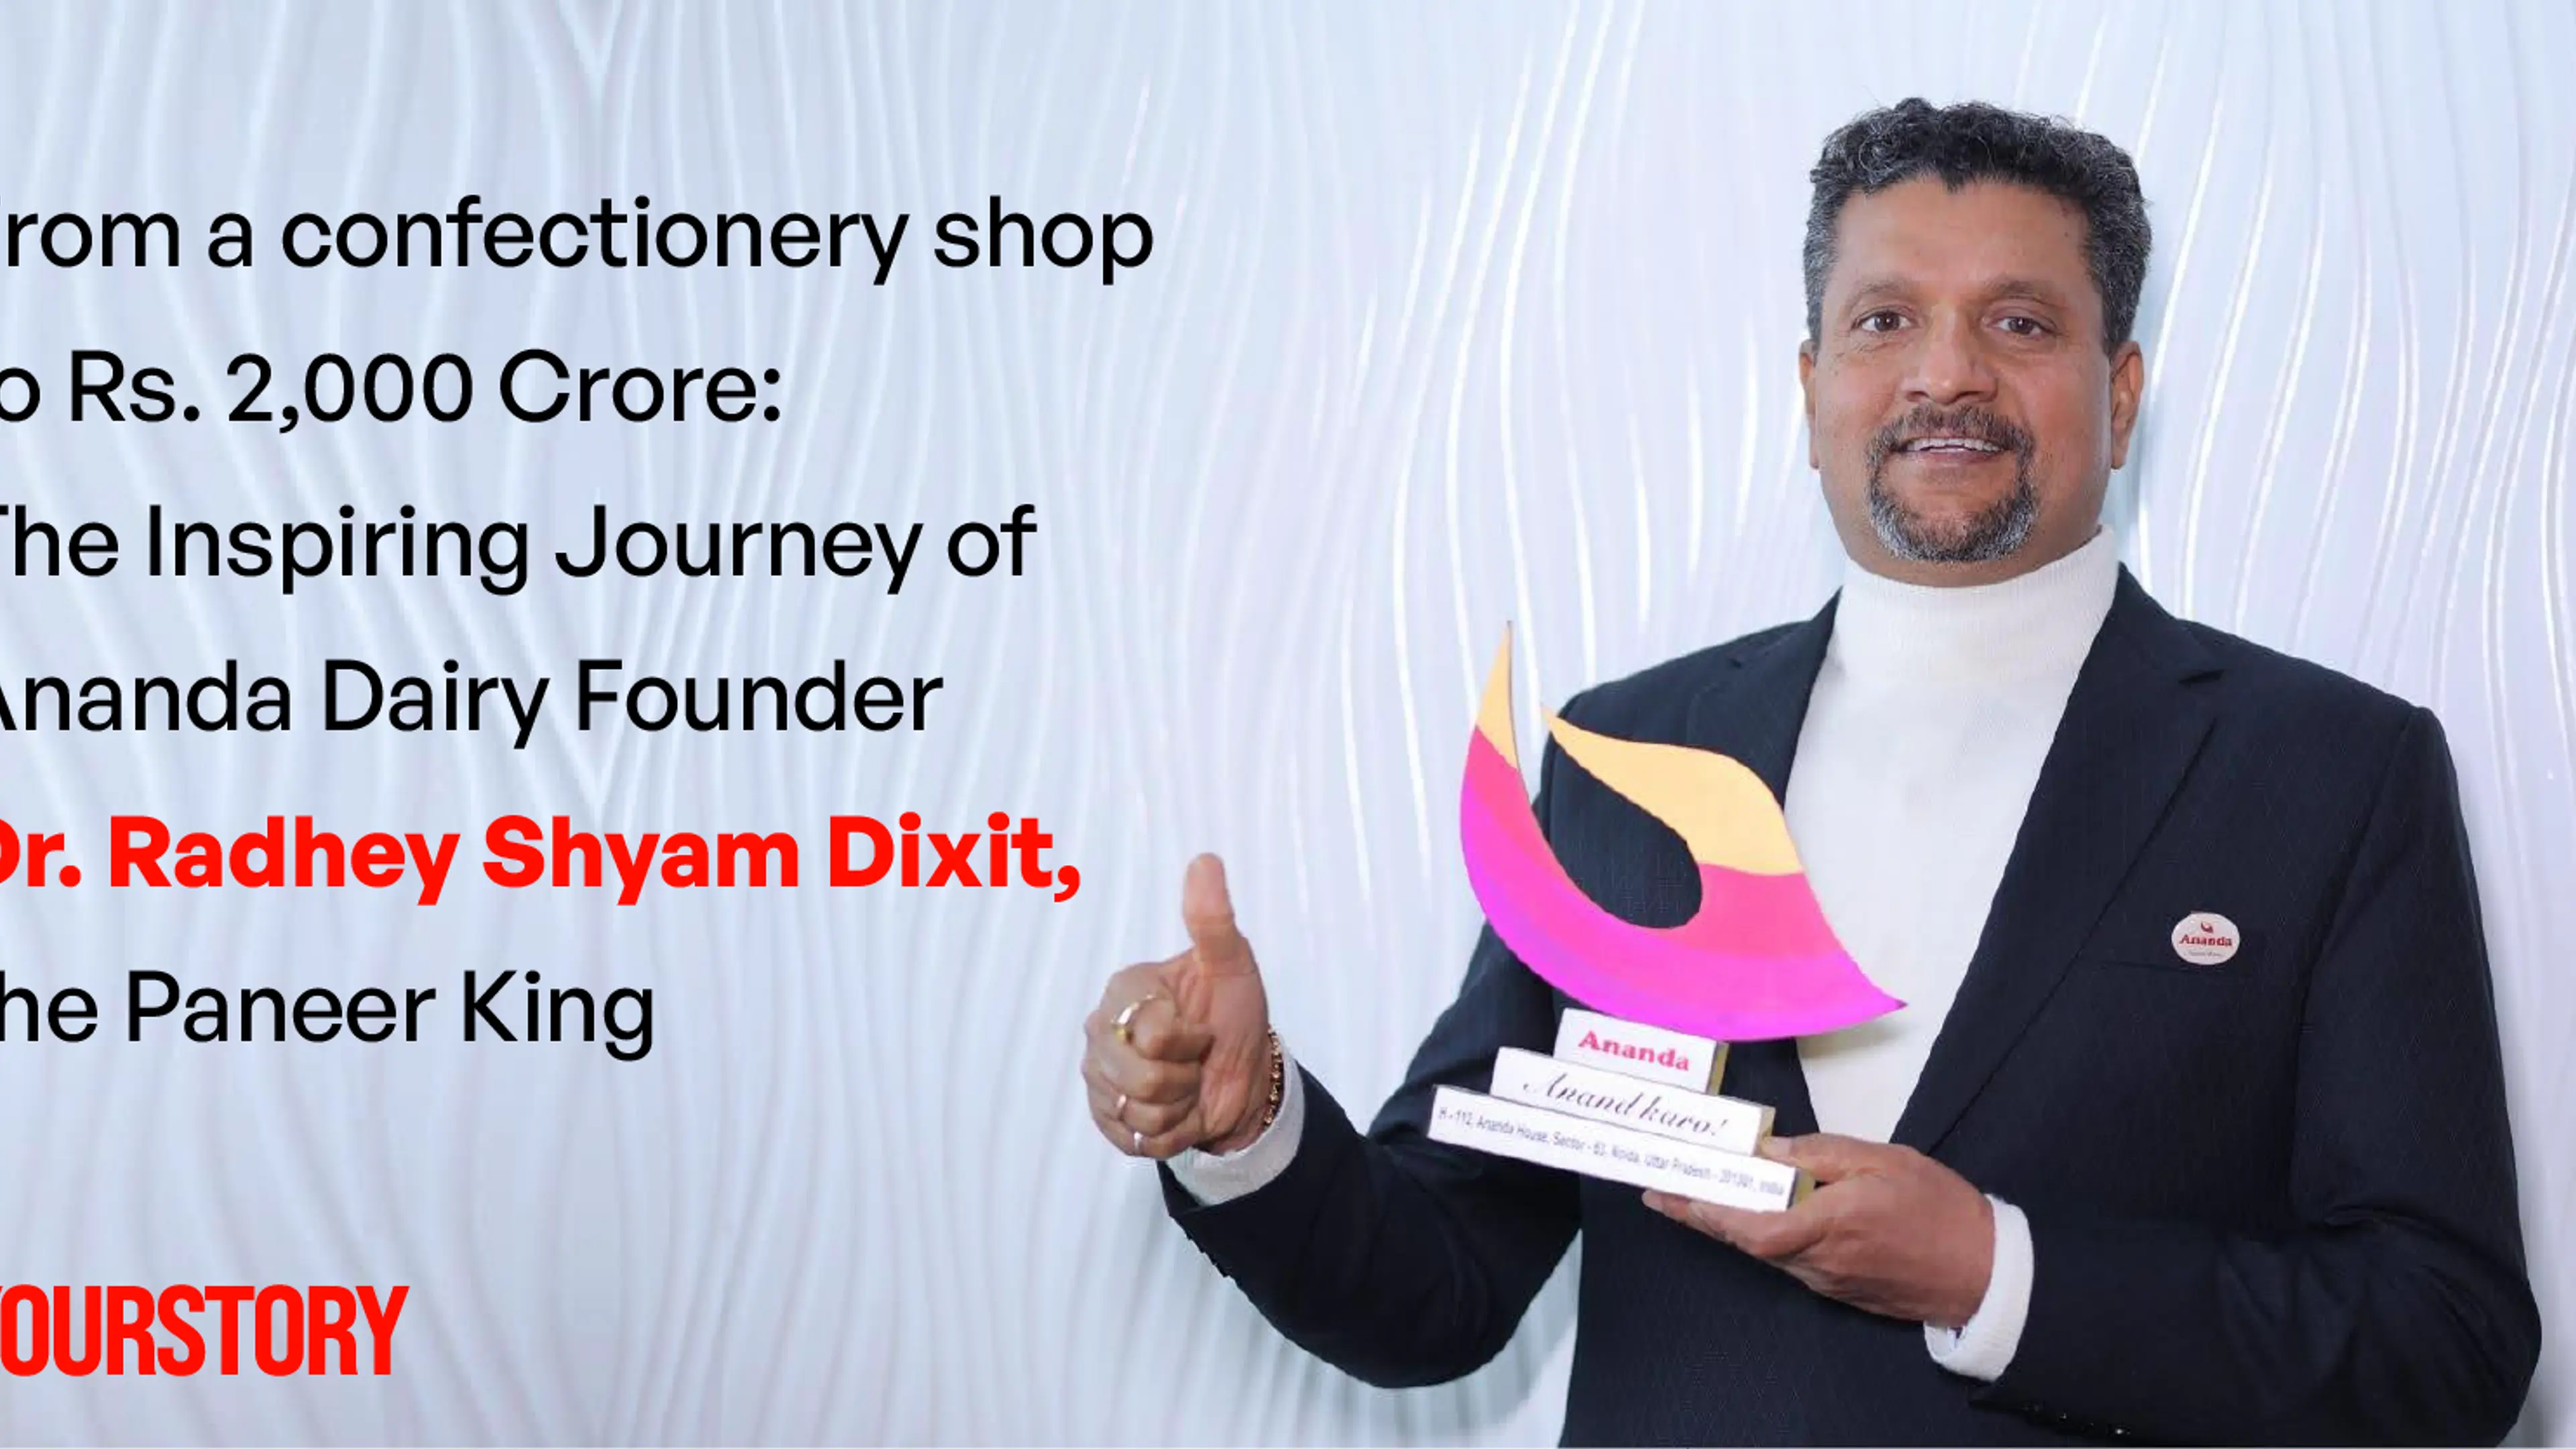 From a confectionery shop to Rs 2,000 crore: Inspiring Journey of Ananda Dairy Founder Dr Radhey Shyam Dixit, the Paneer King